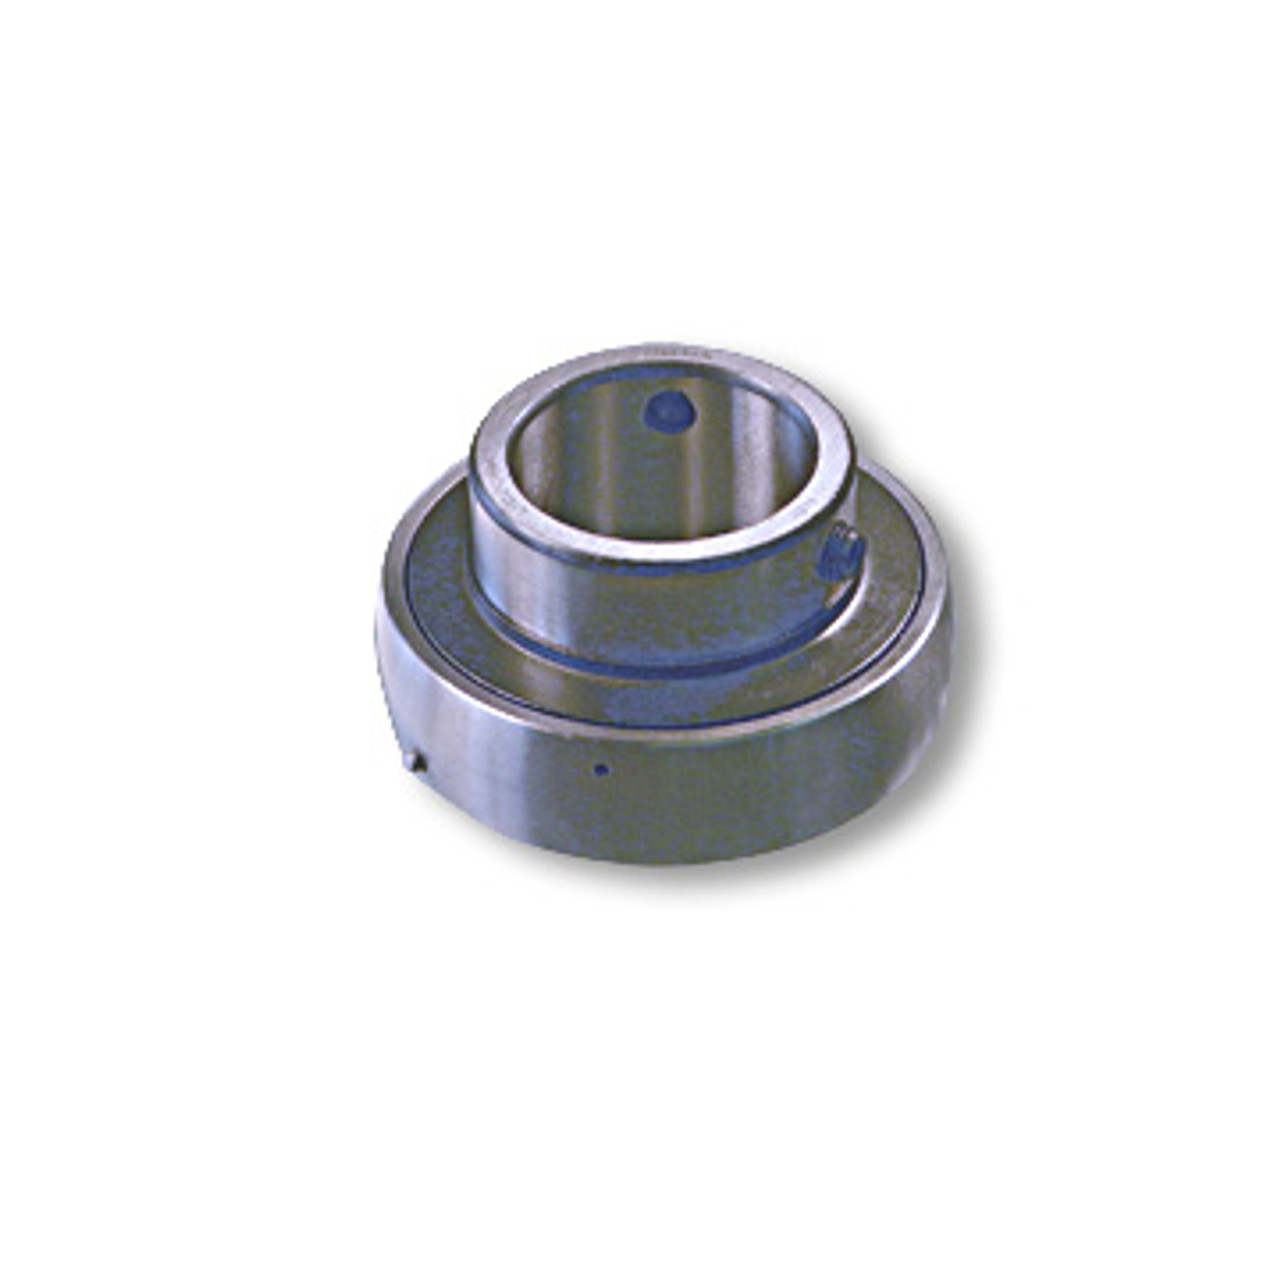 Axle Bearing, For 40mm Axles With Integral Locking Collar